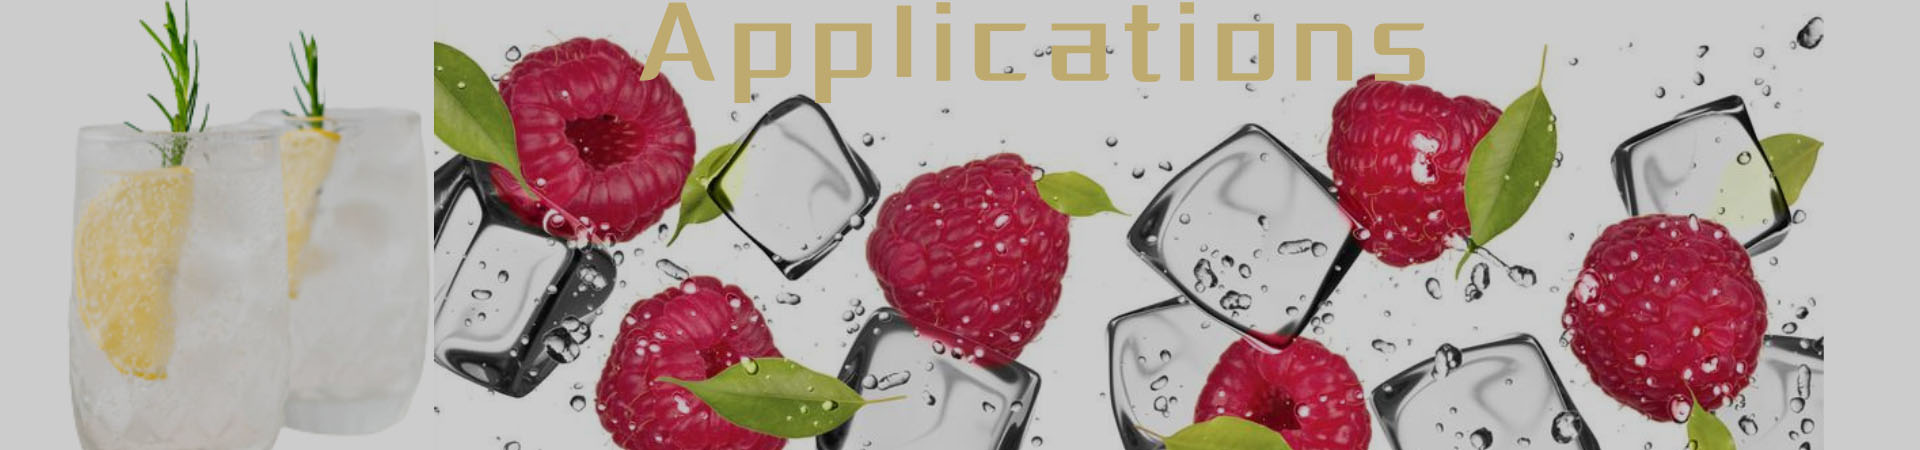 applications_banner